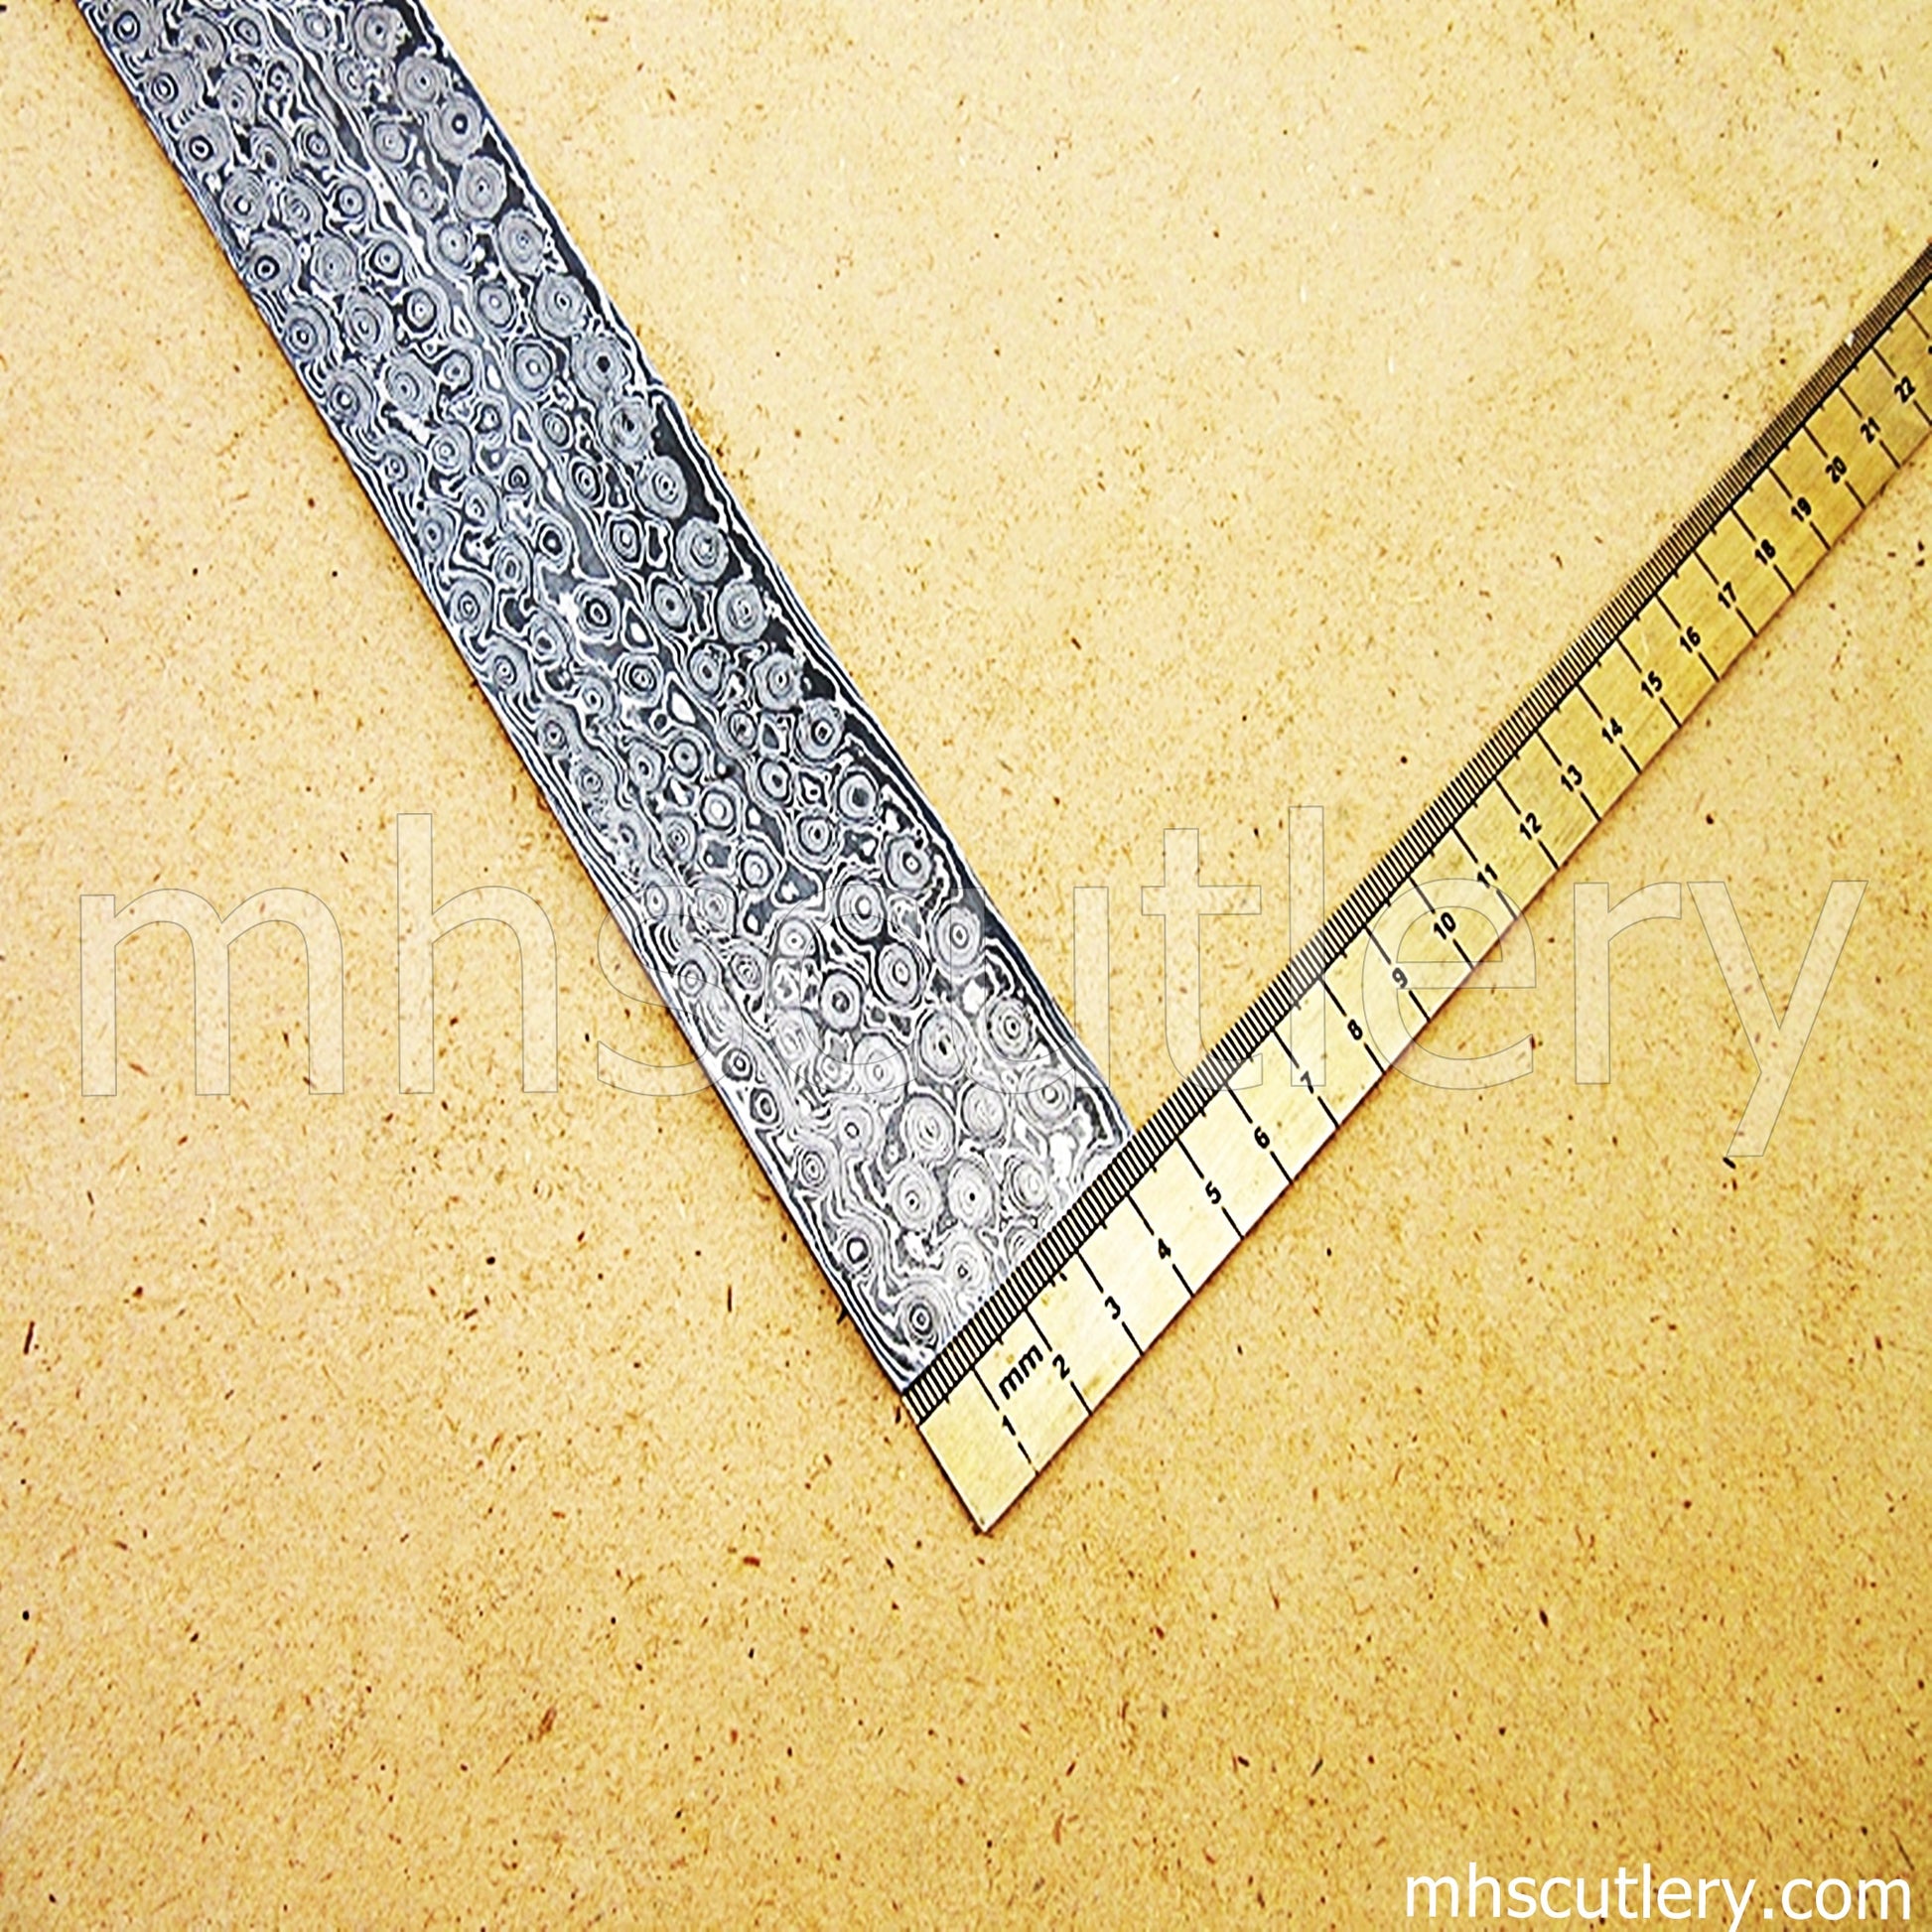 Hand Forged Raindrop Damascus Steel Billet For Knife Making | mhscutlery